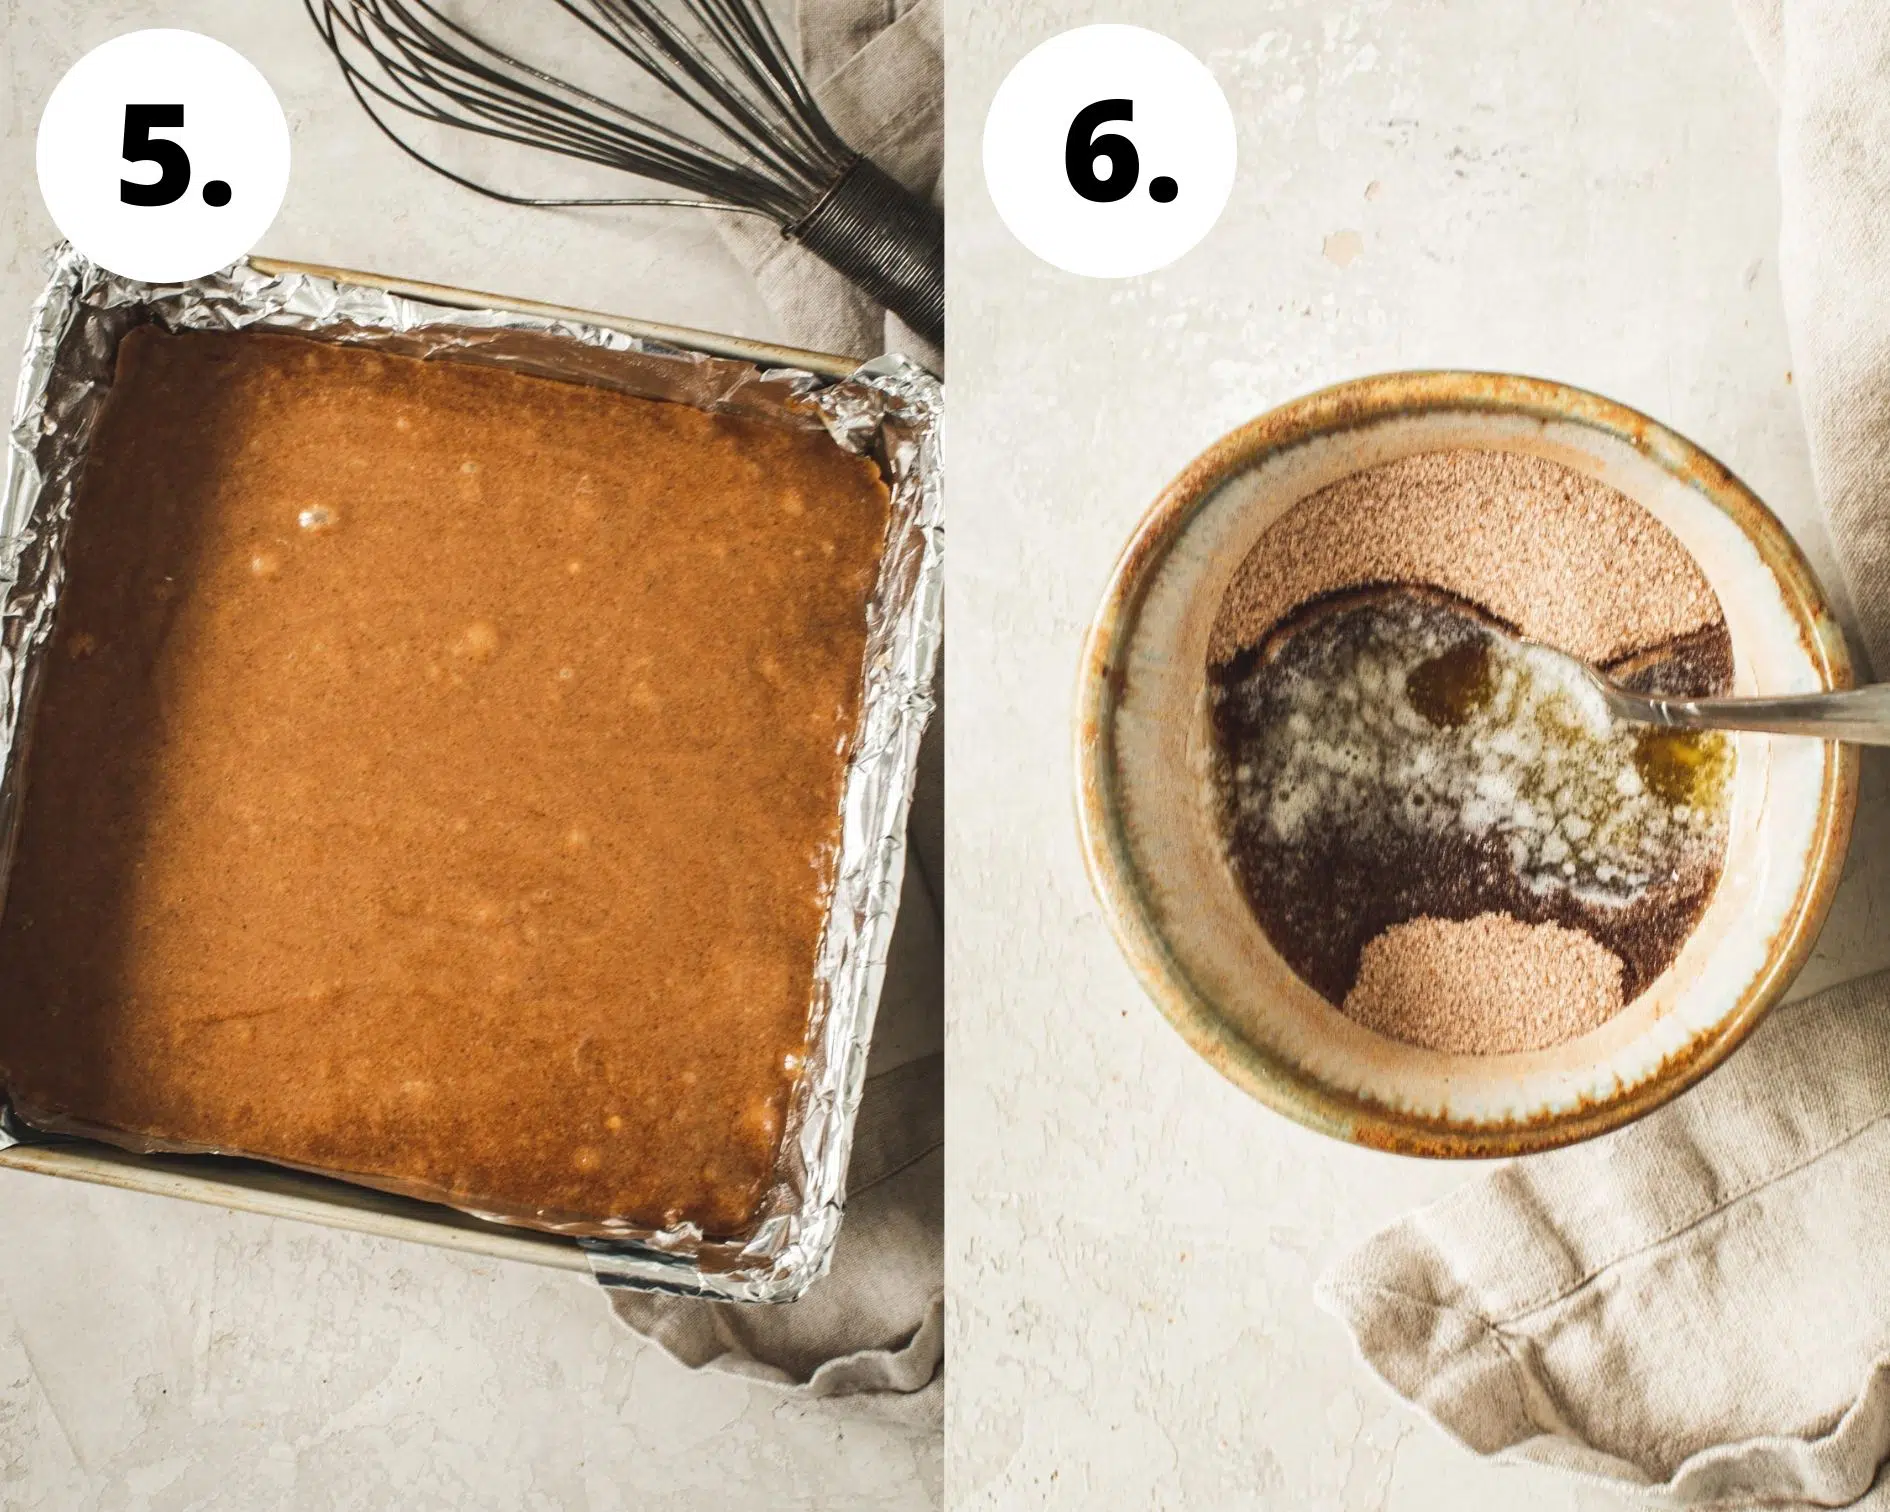 Cinnamon squares process steps 5 and 6.